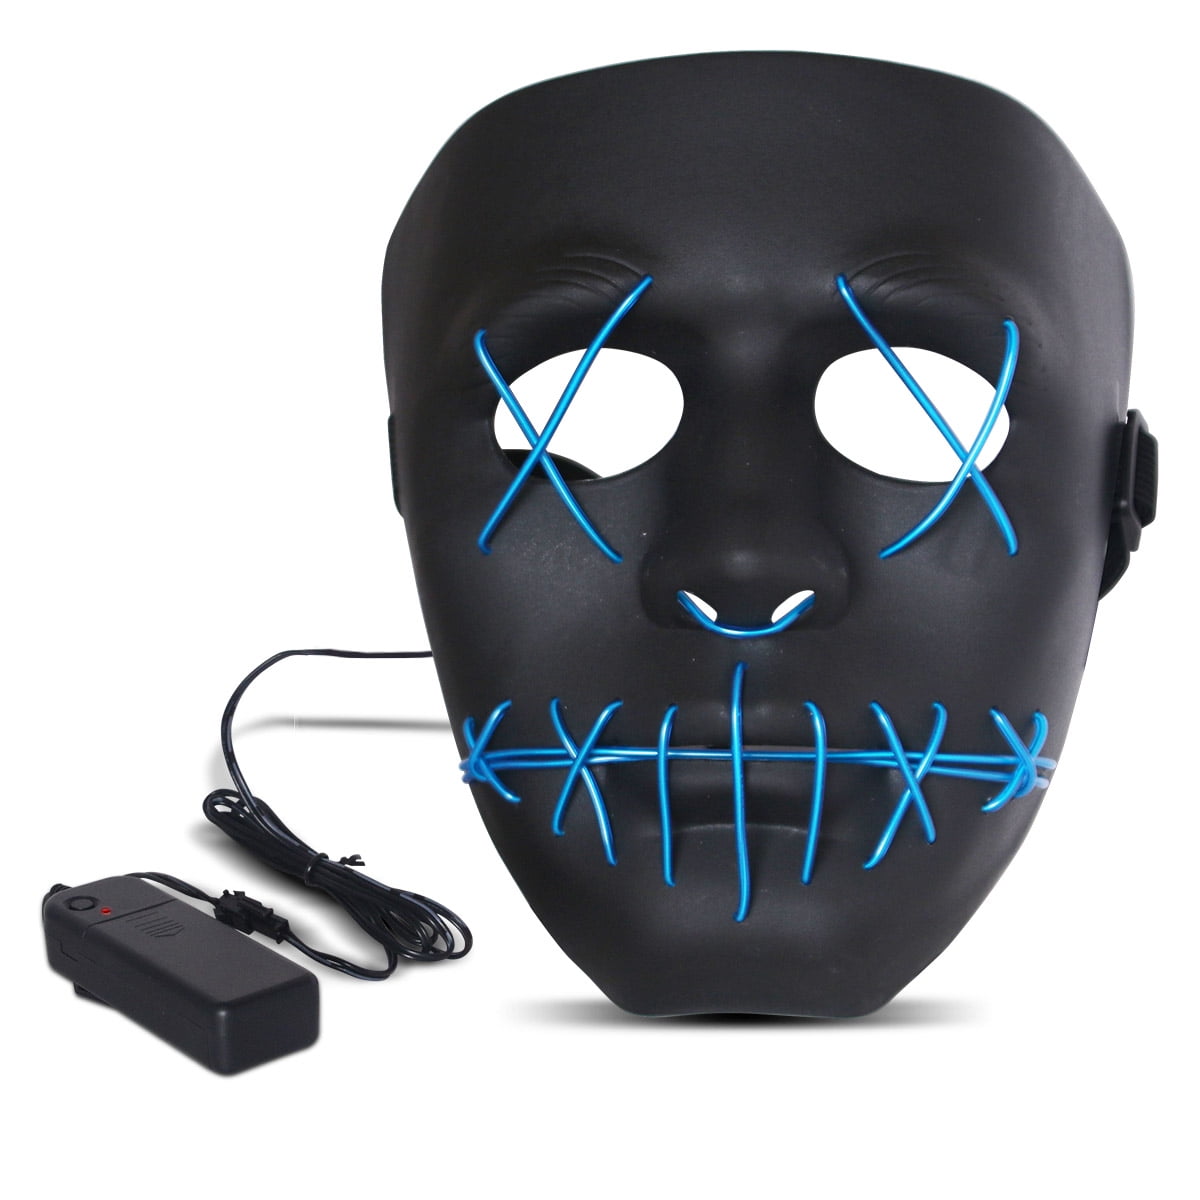 LED Mask Purge Halloween Scary Mask Cosplay Led Costume Mask EL Wire Light up for Halloween Festival Party Blue